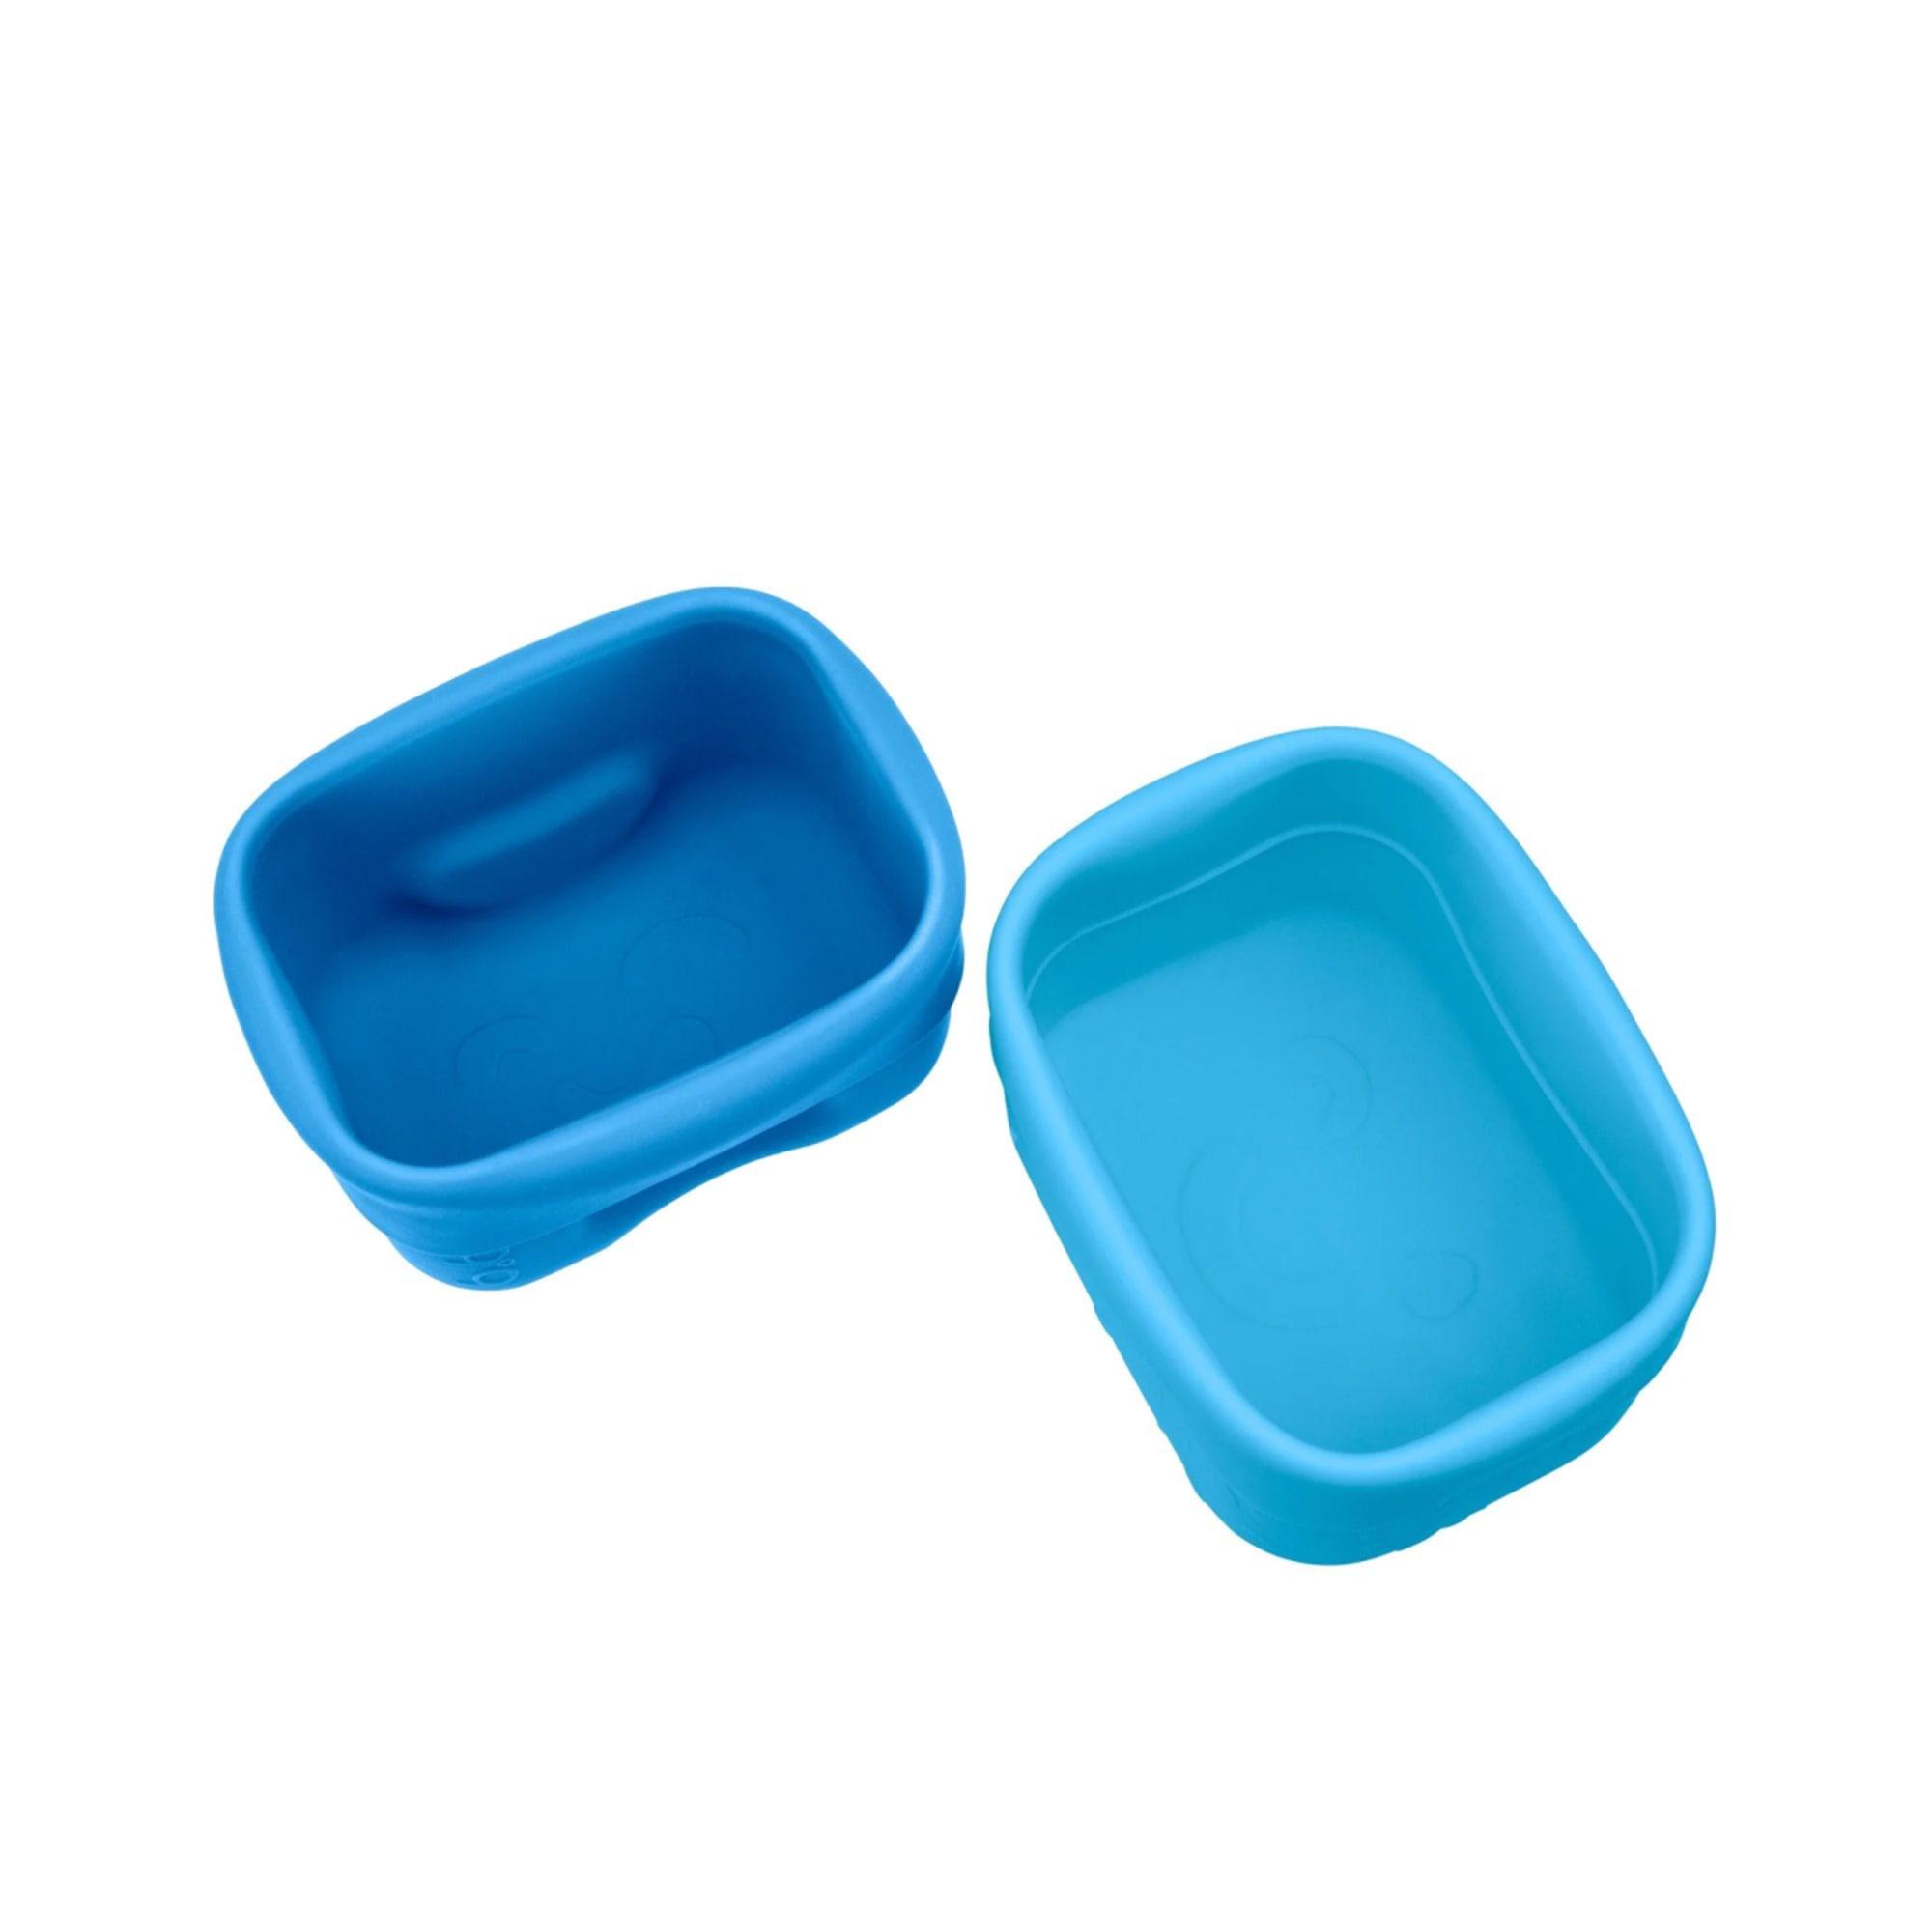 b.box Silicone Snack Cup Set of 2 Ocean Image 5